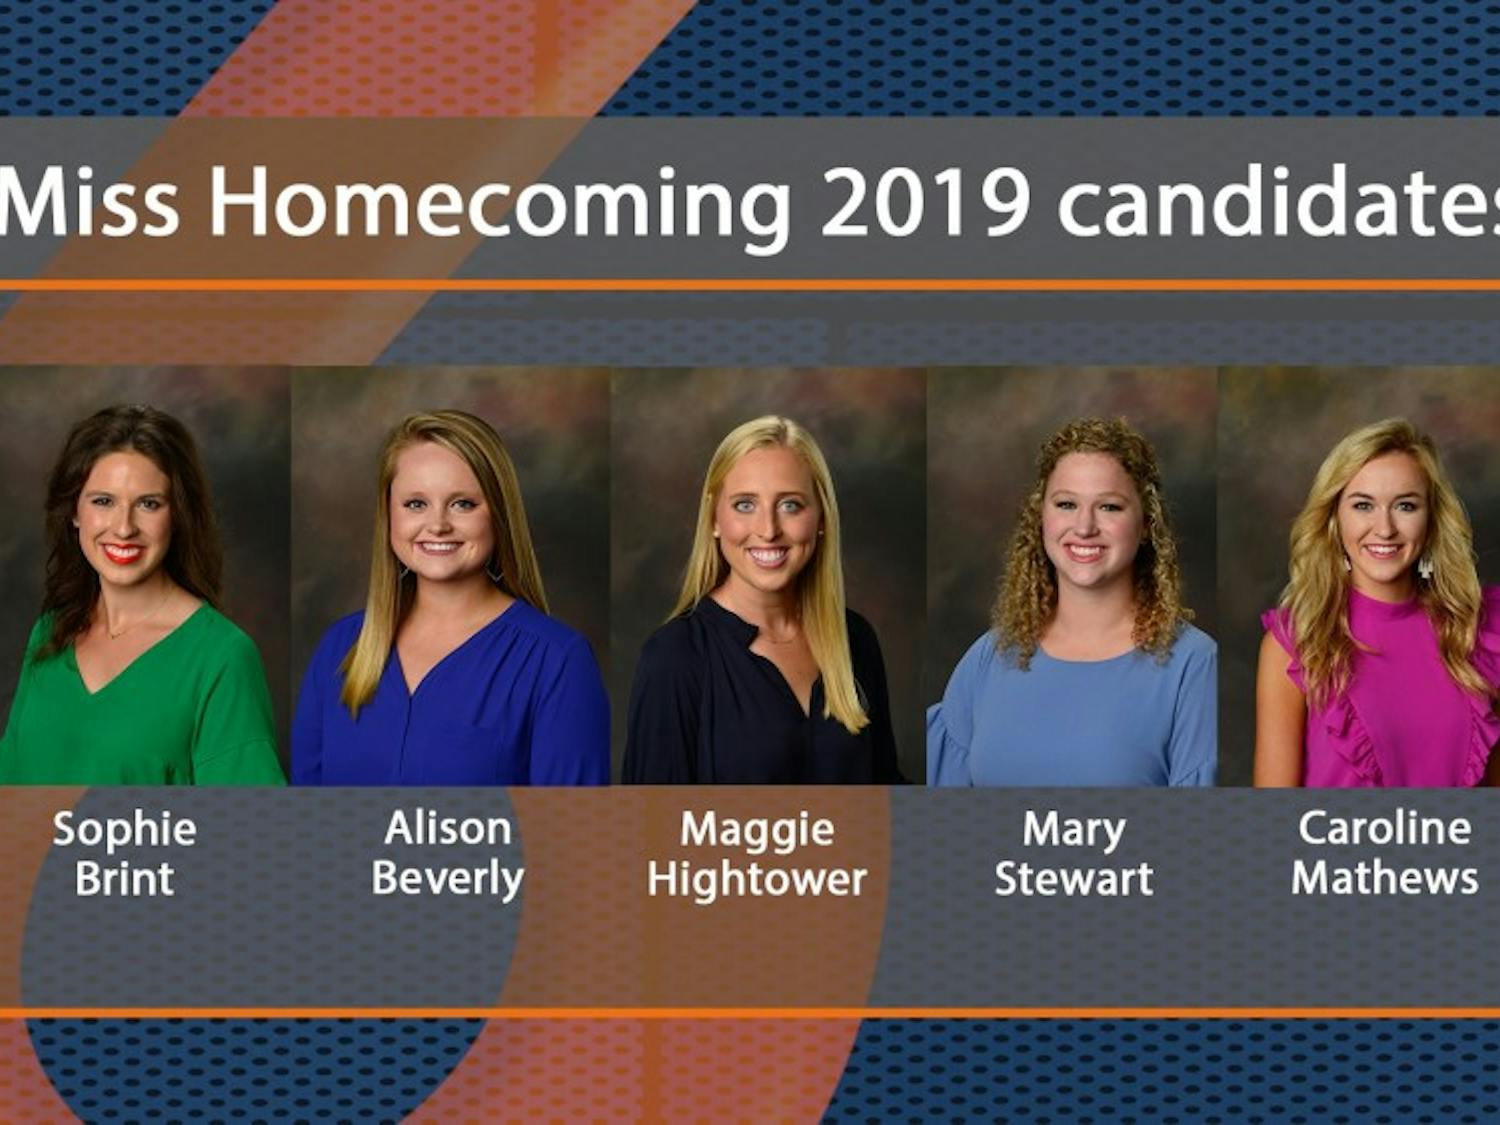 Miss Homecoming 2019 candidates